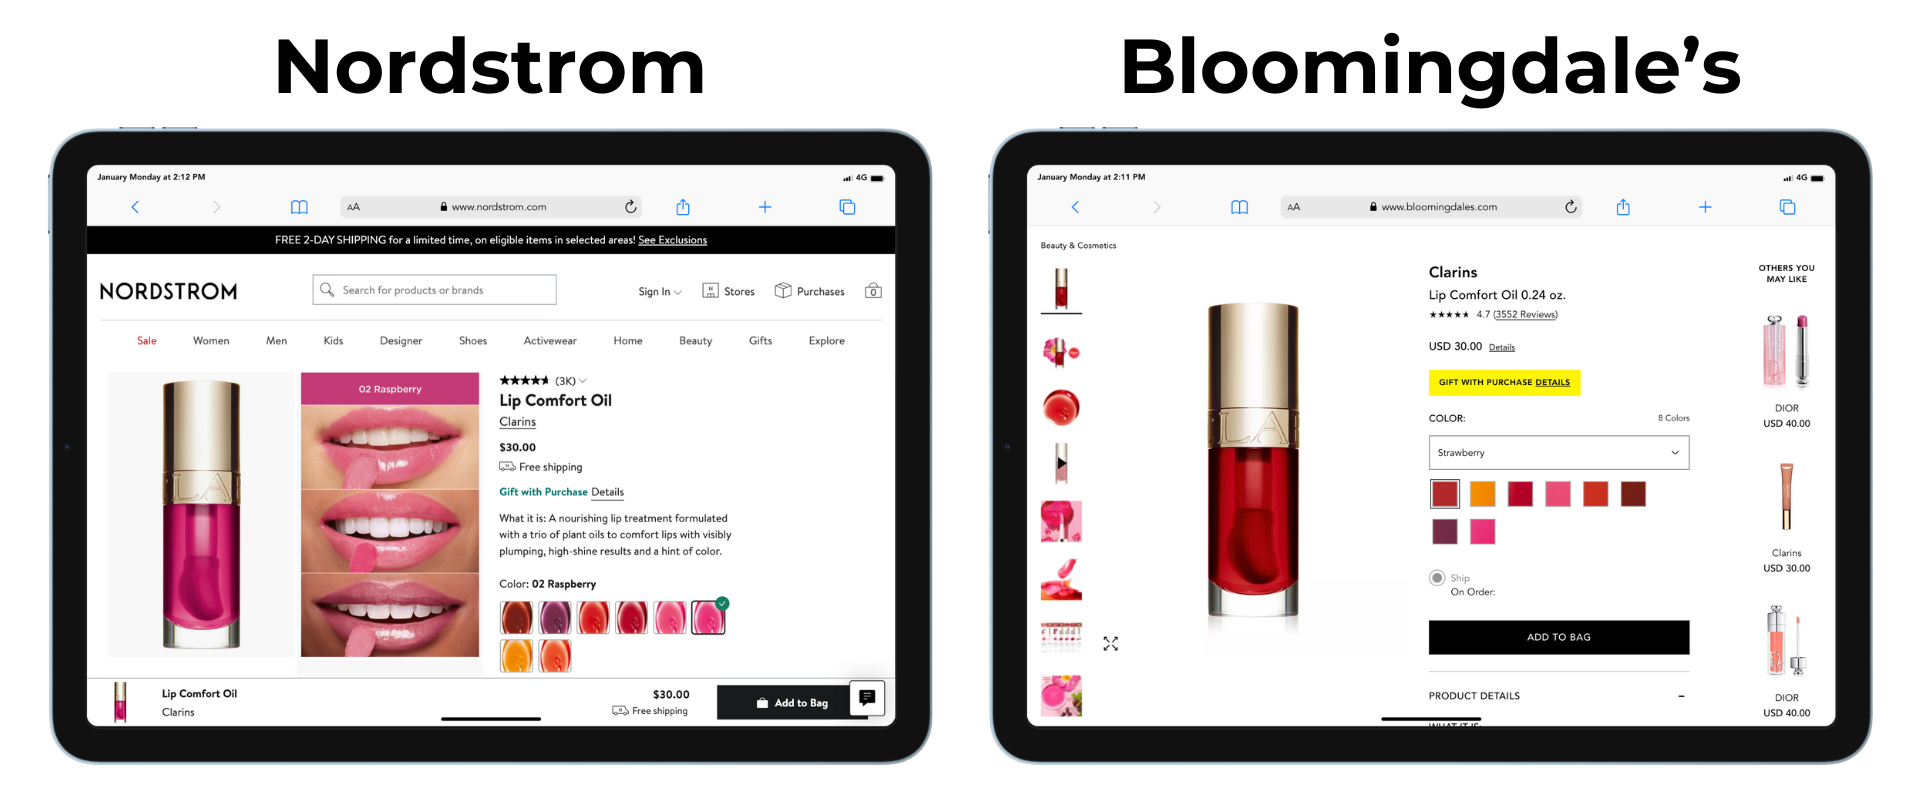 Comparison of PDP pages on Nordstrom & Bloomingdale's for Clarins.